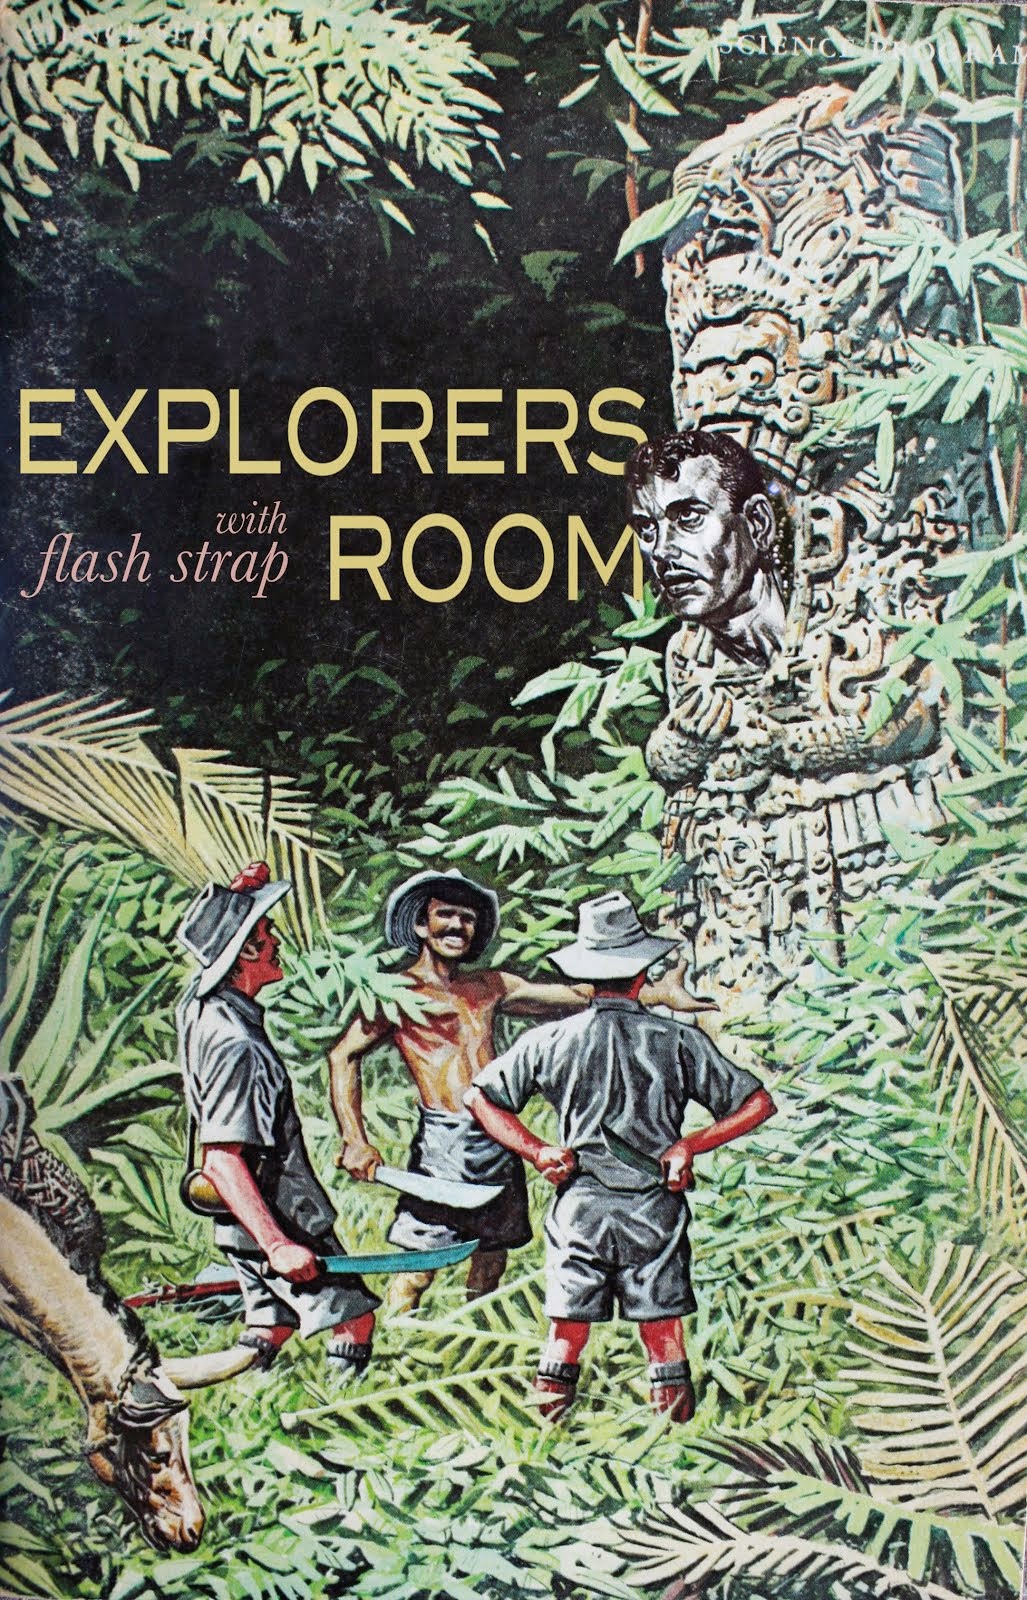 Explorers Room with Flash Strap on WFMU